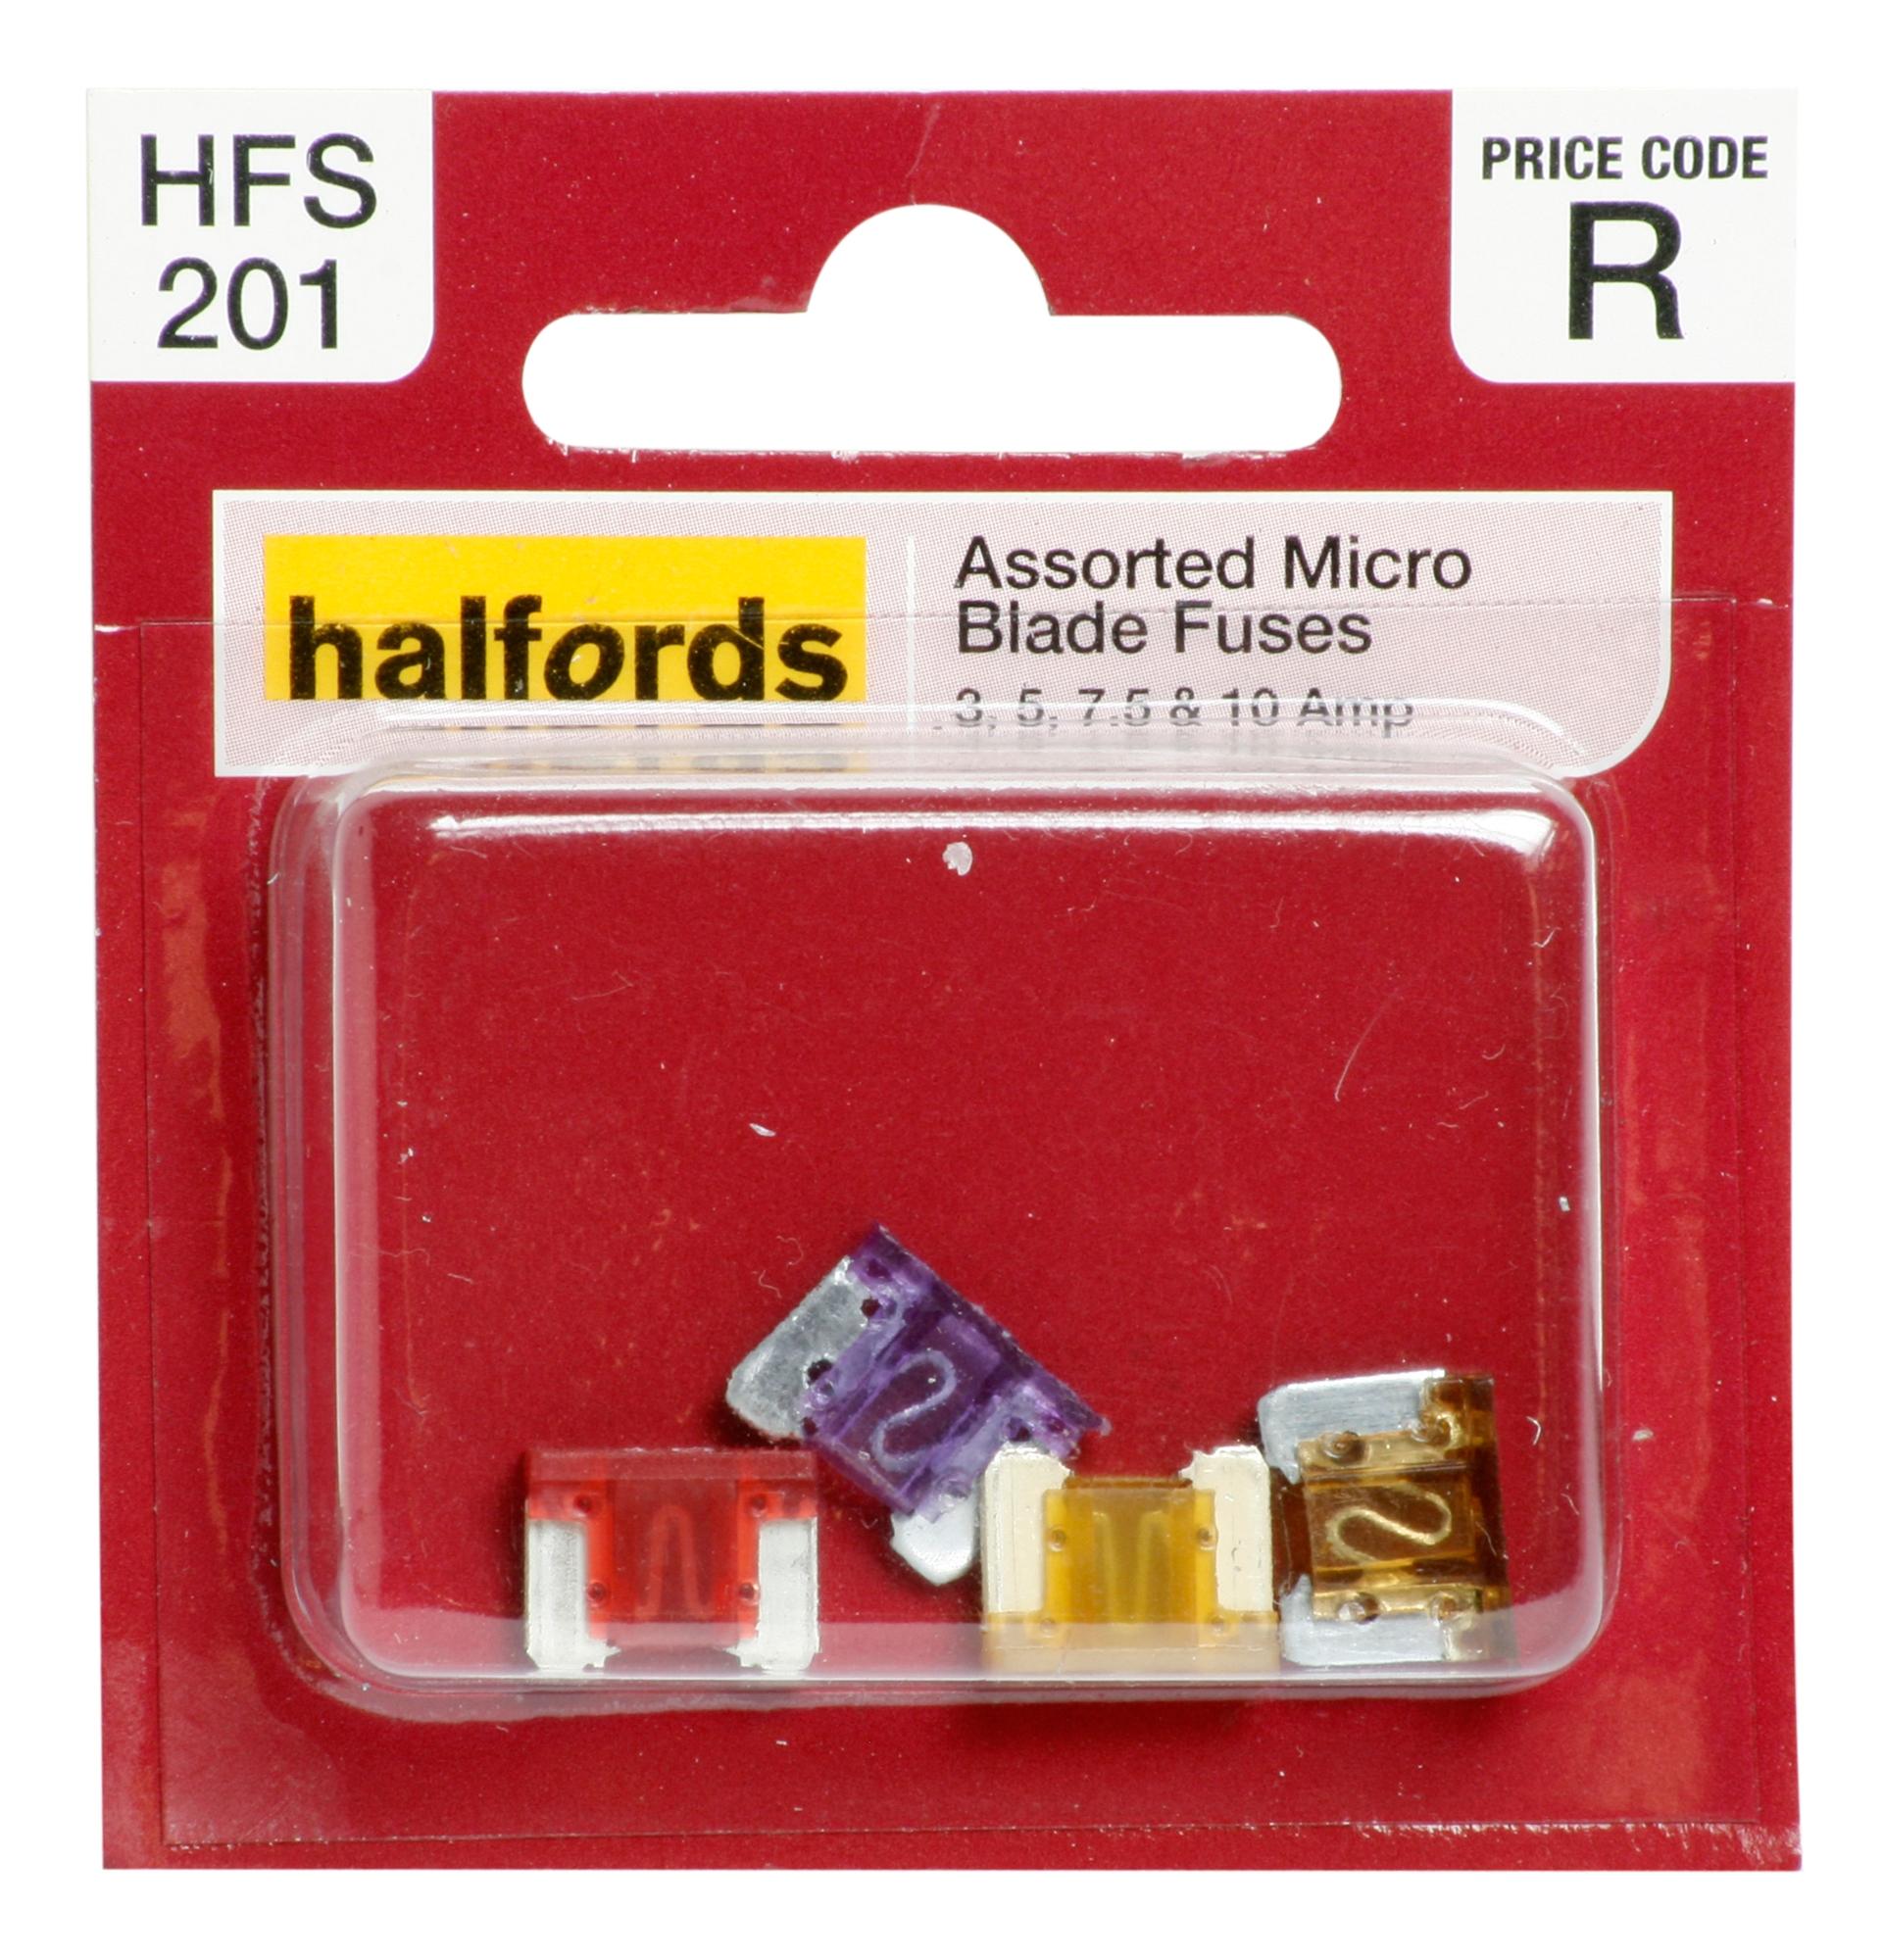 Halfords Assorted Micro Fuses 3/5/7.5/10 Amp (Hfs201)